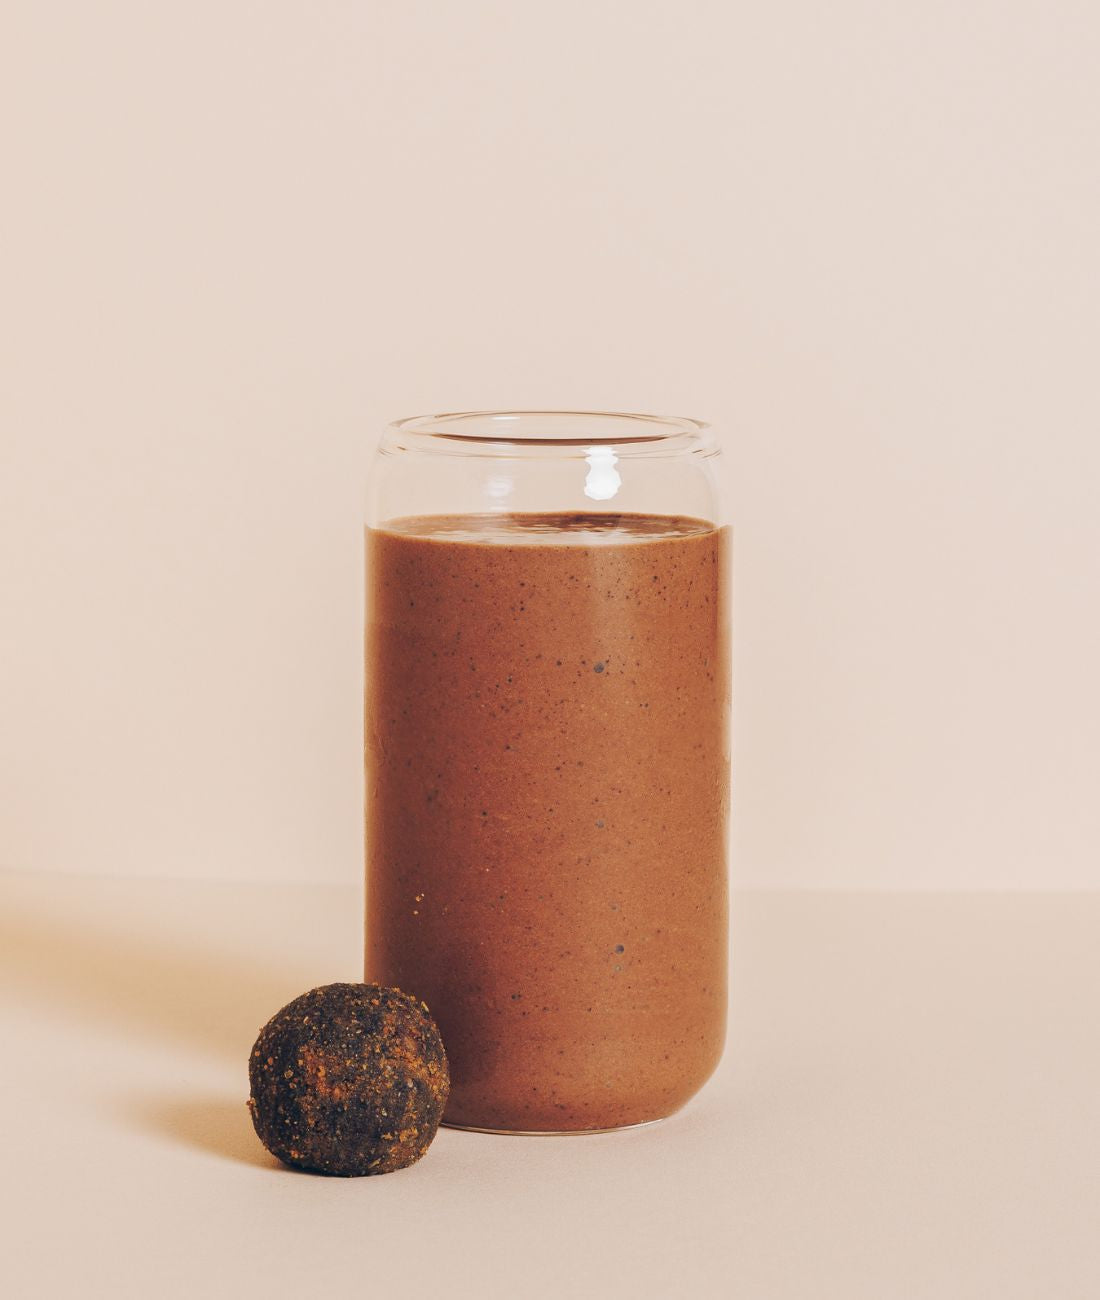 Blender Bombs - Cacao + Peanut Butter 2.3 oz (8 x 2 Pack